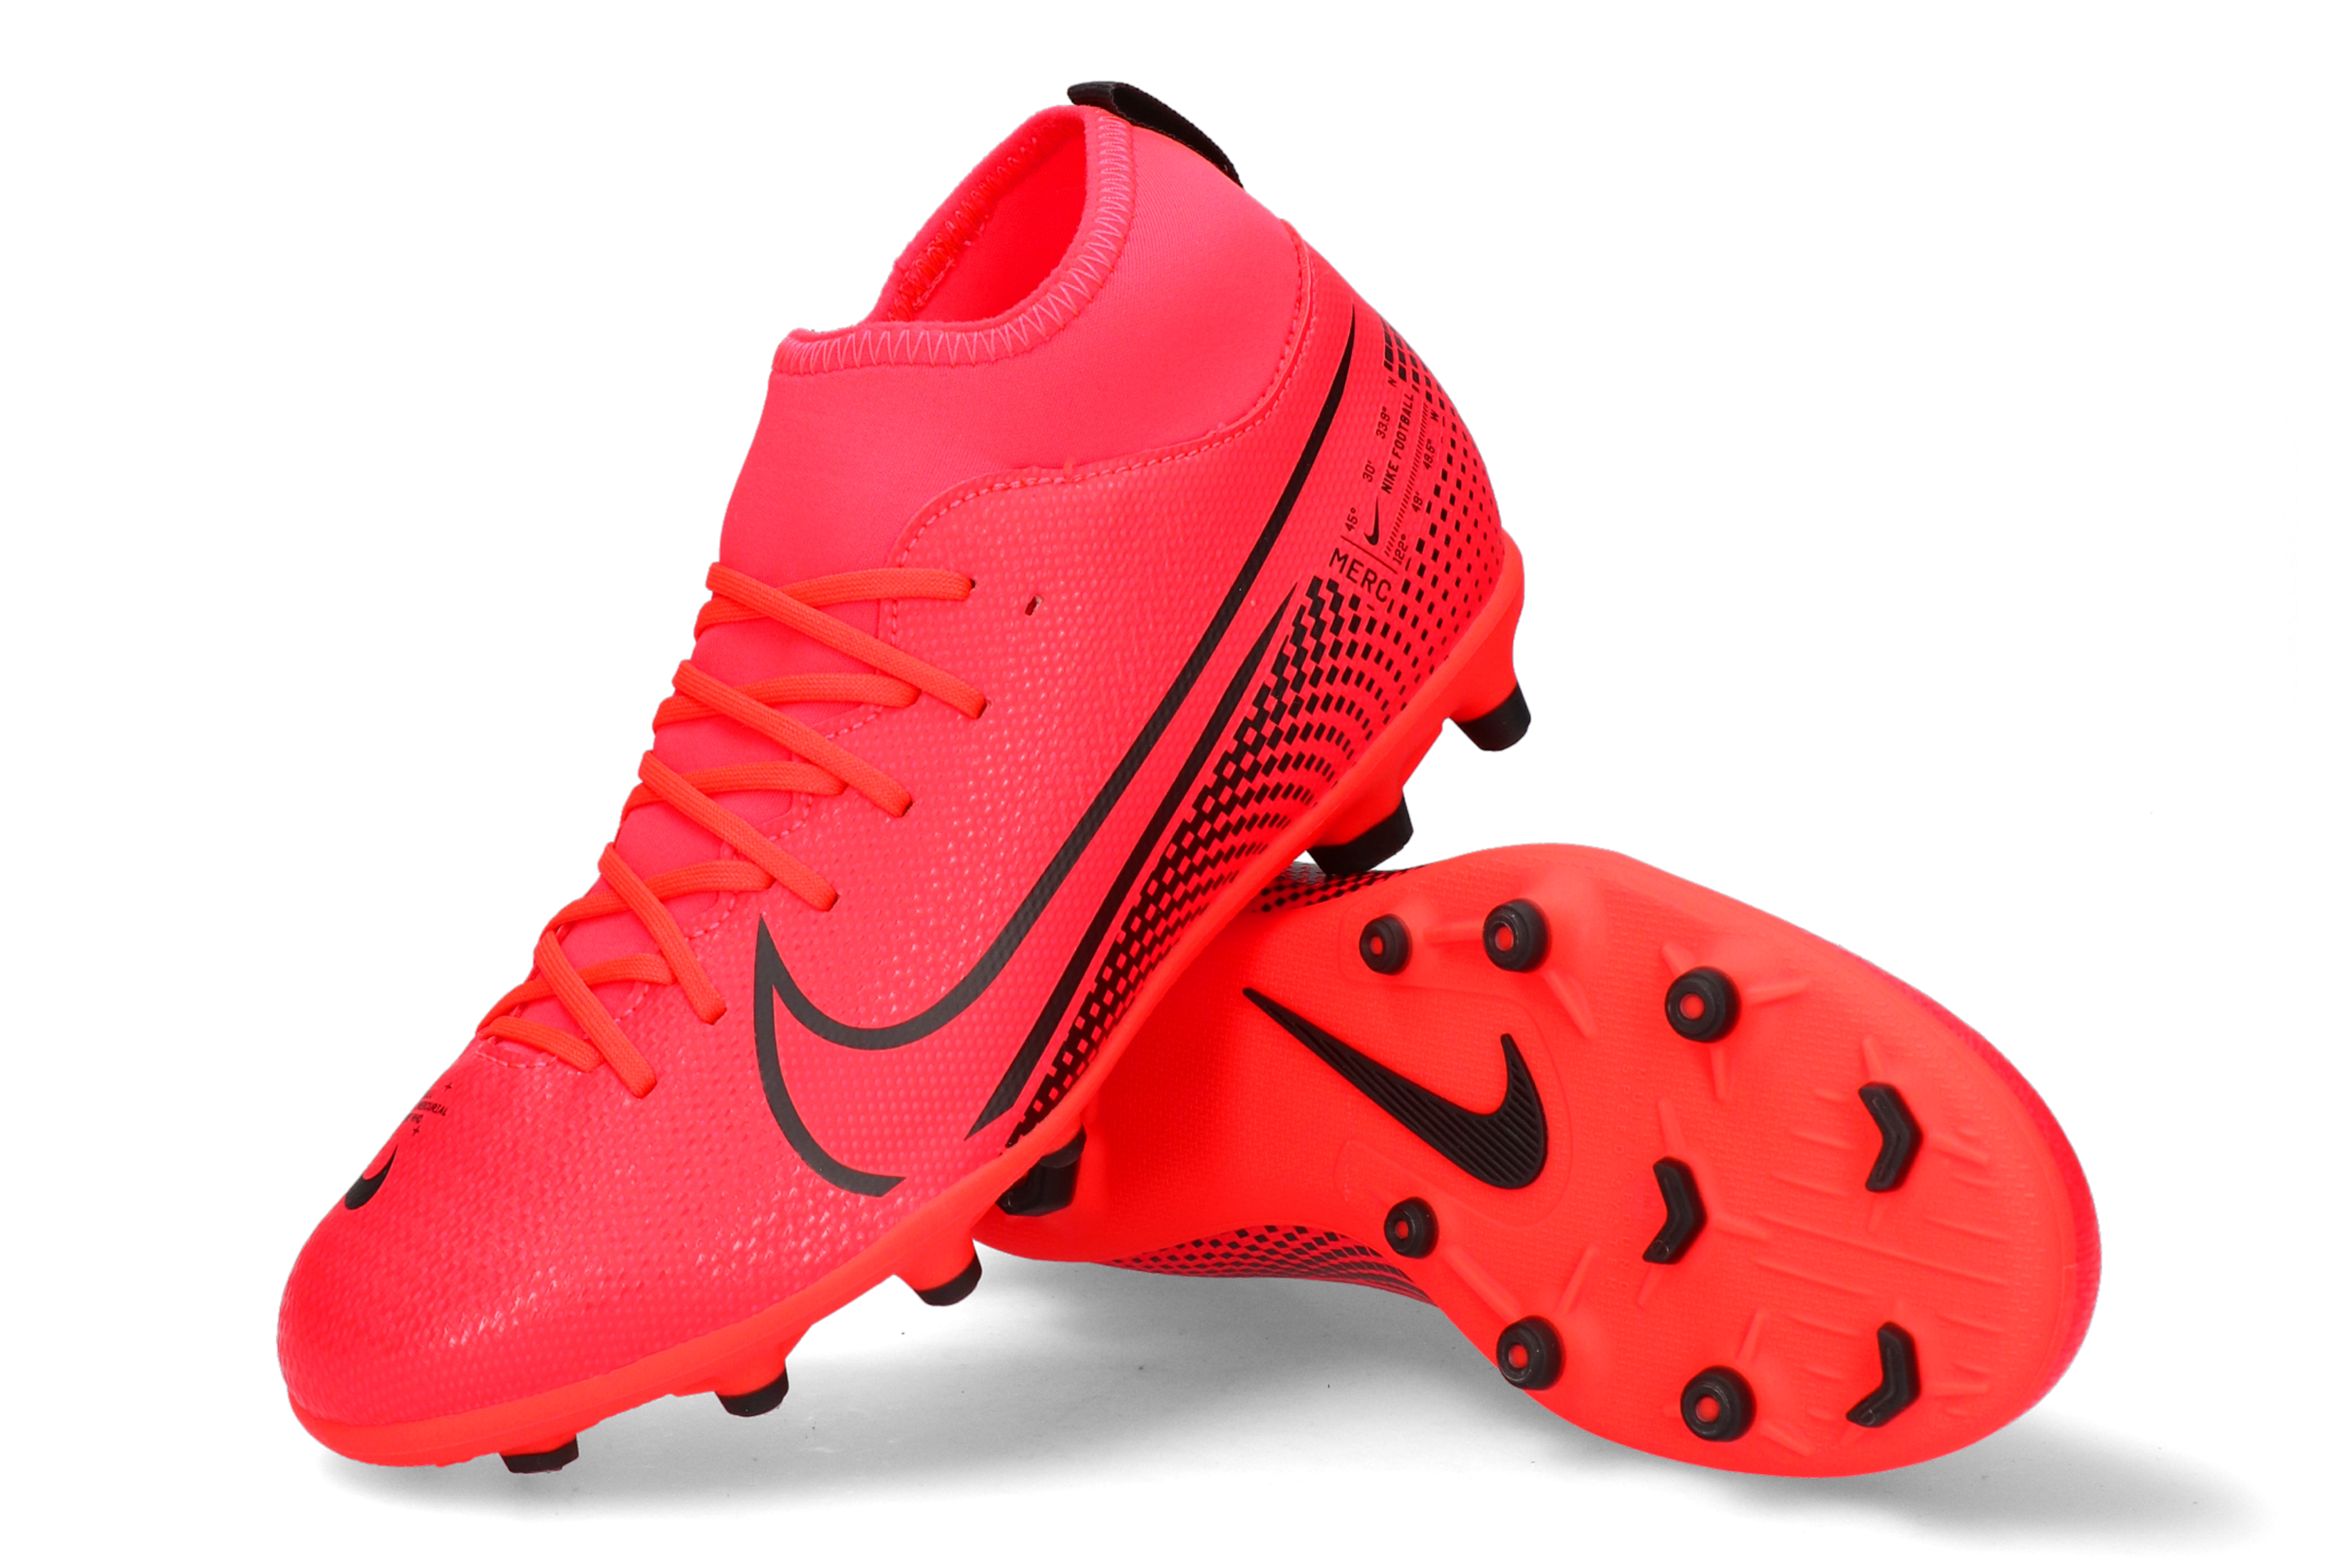 Junior Mercurial Superfly 7 Club Turf Cleat by Nike World.